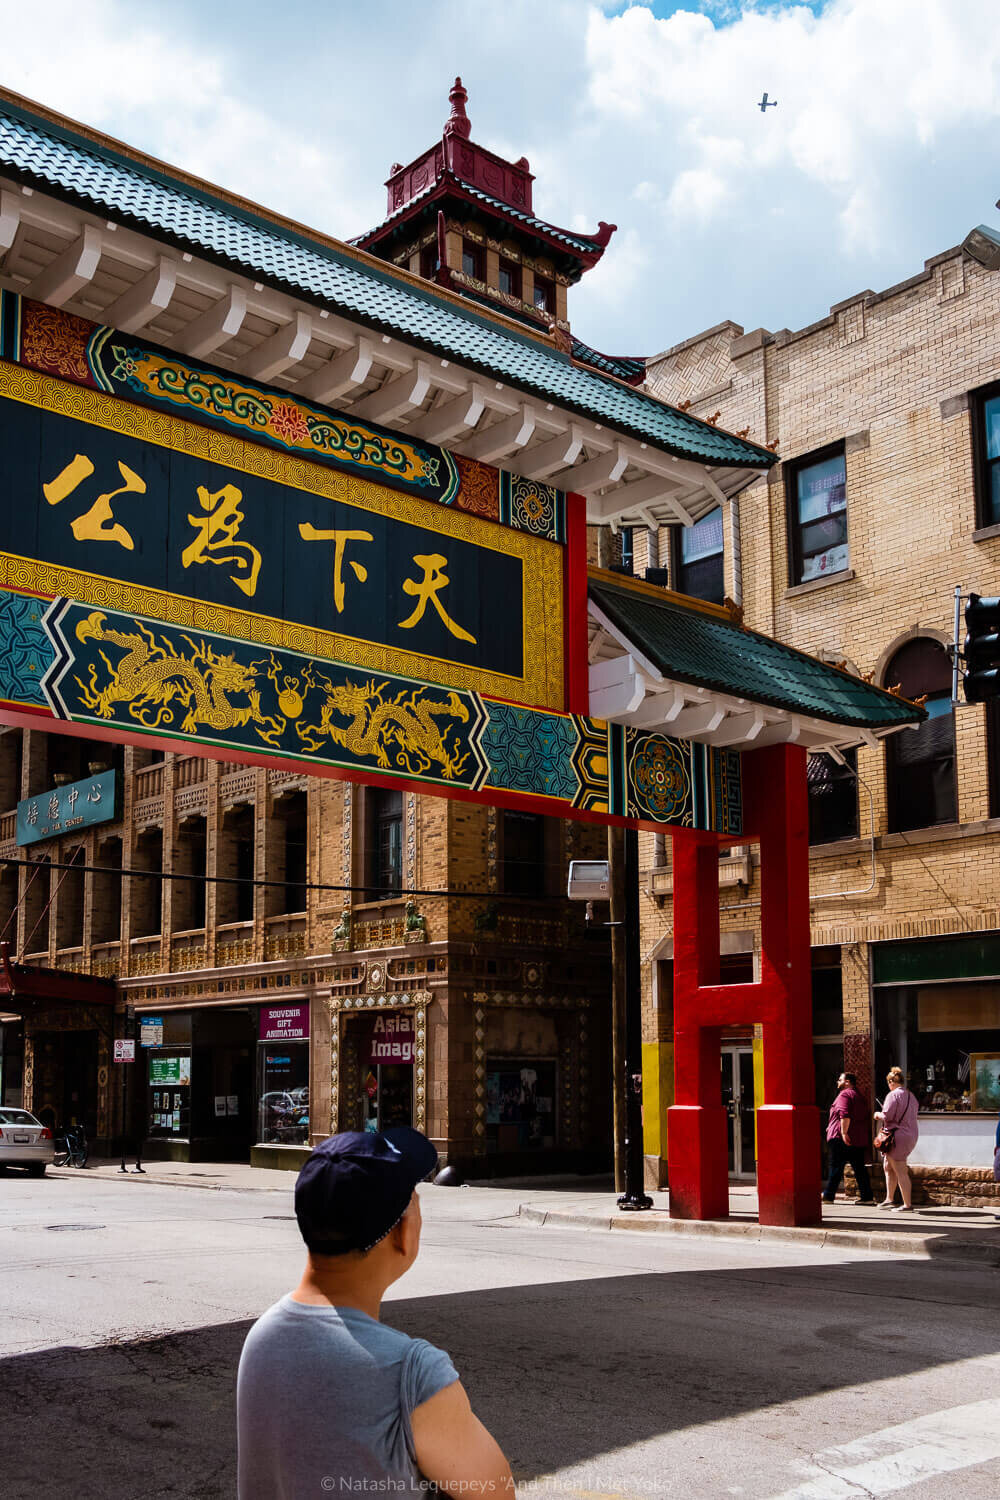 Chinatown in Chicago, USA. Travel photography and guide by © Natasha Lequepeys for "And Then I Met Yoko". #chicago #usa #travelblog #travelphotography